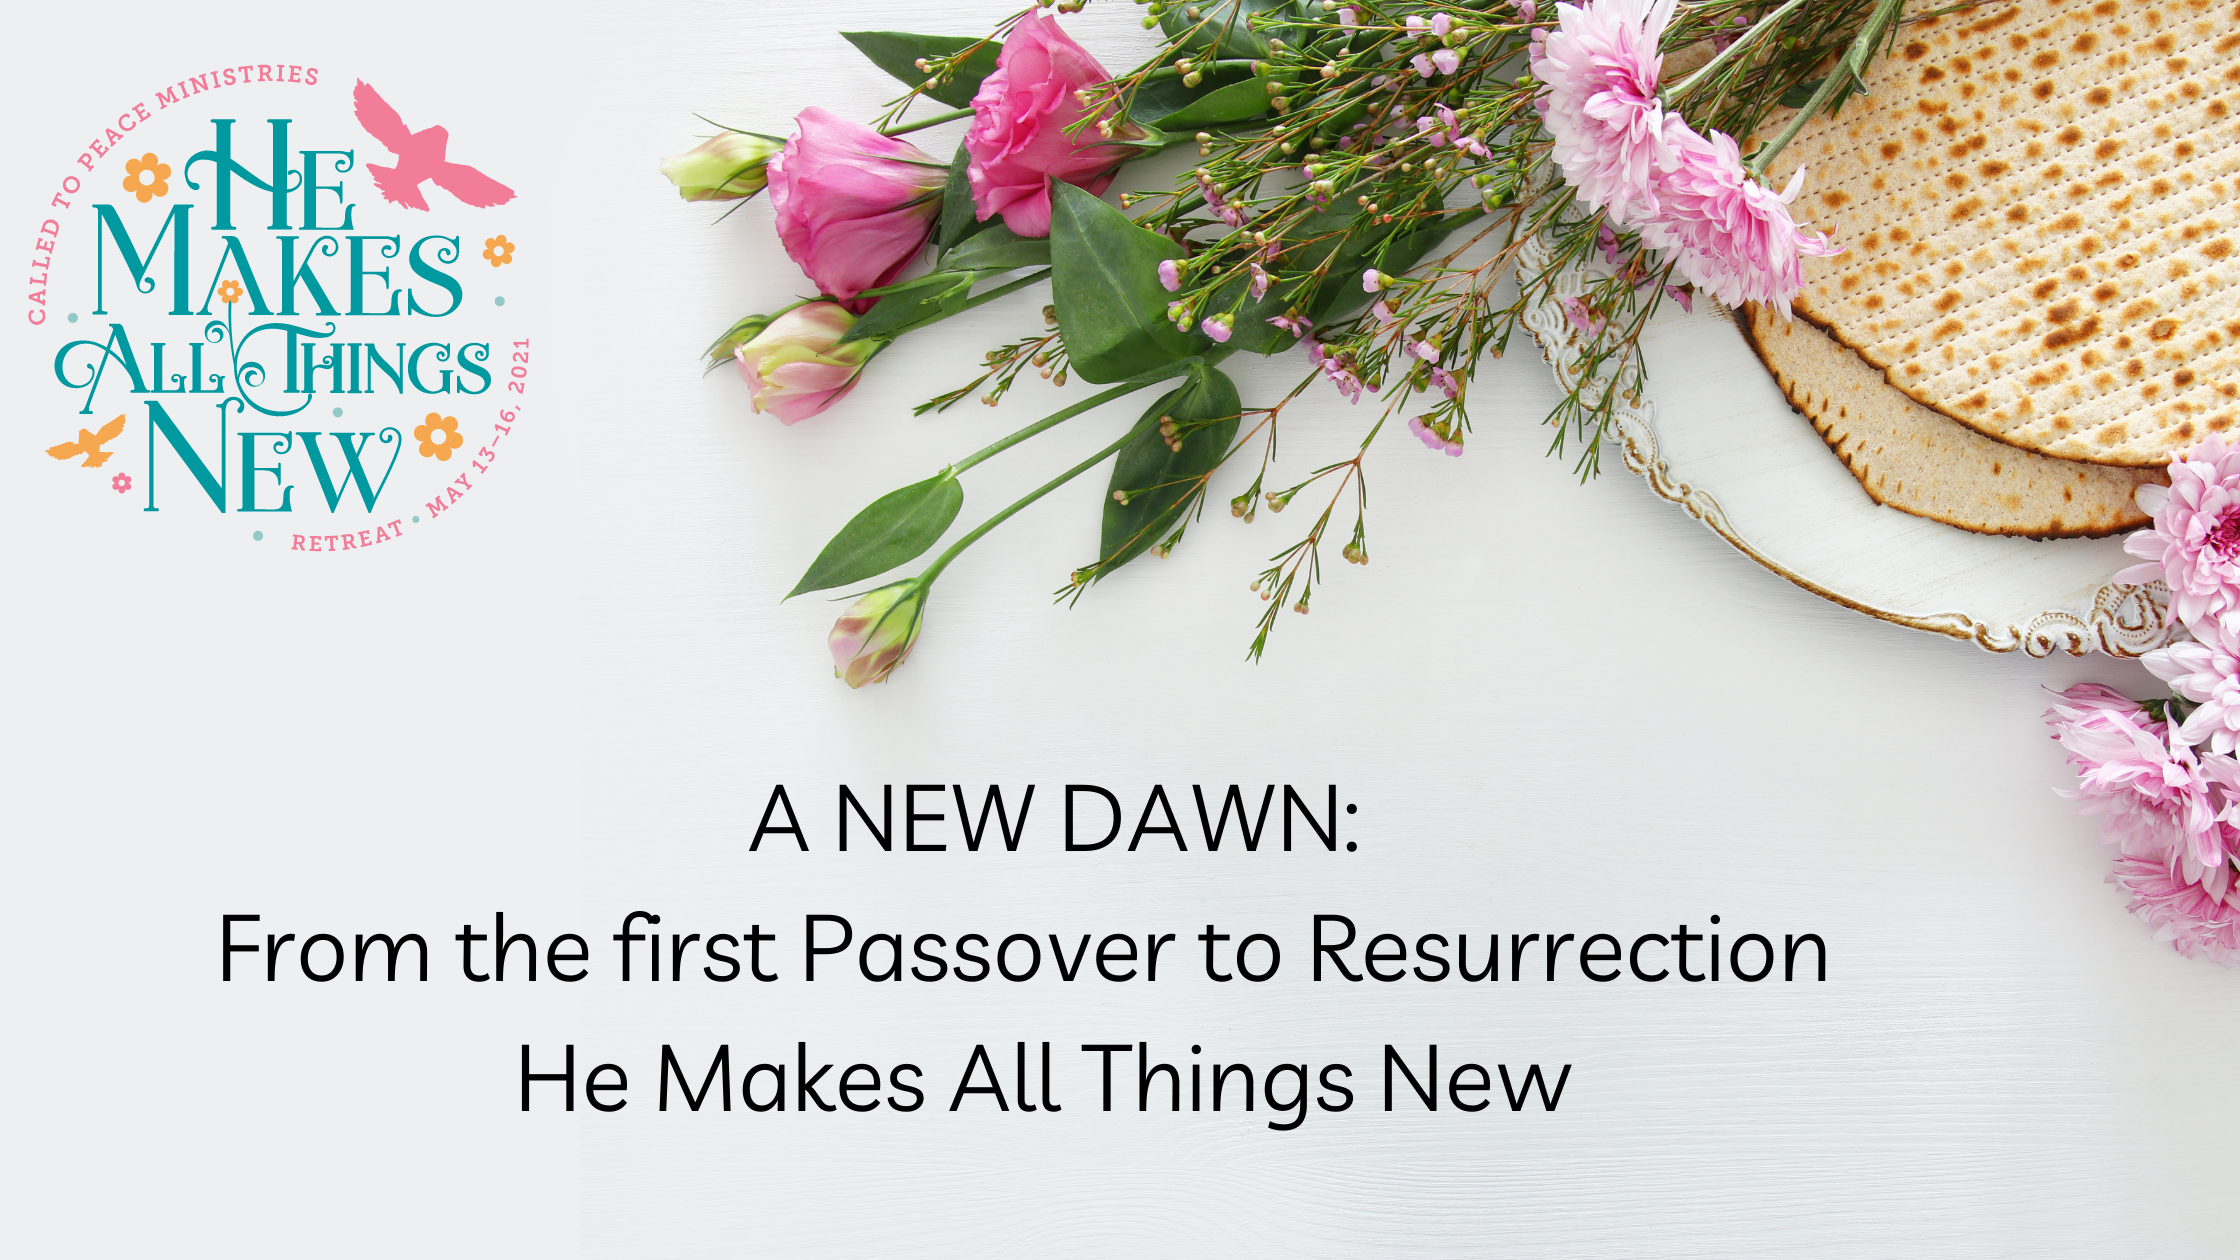 A NEW DAWN: From the first Passover to Resurrection 2021